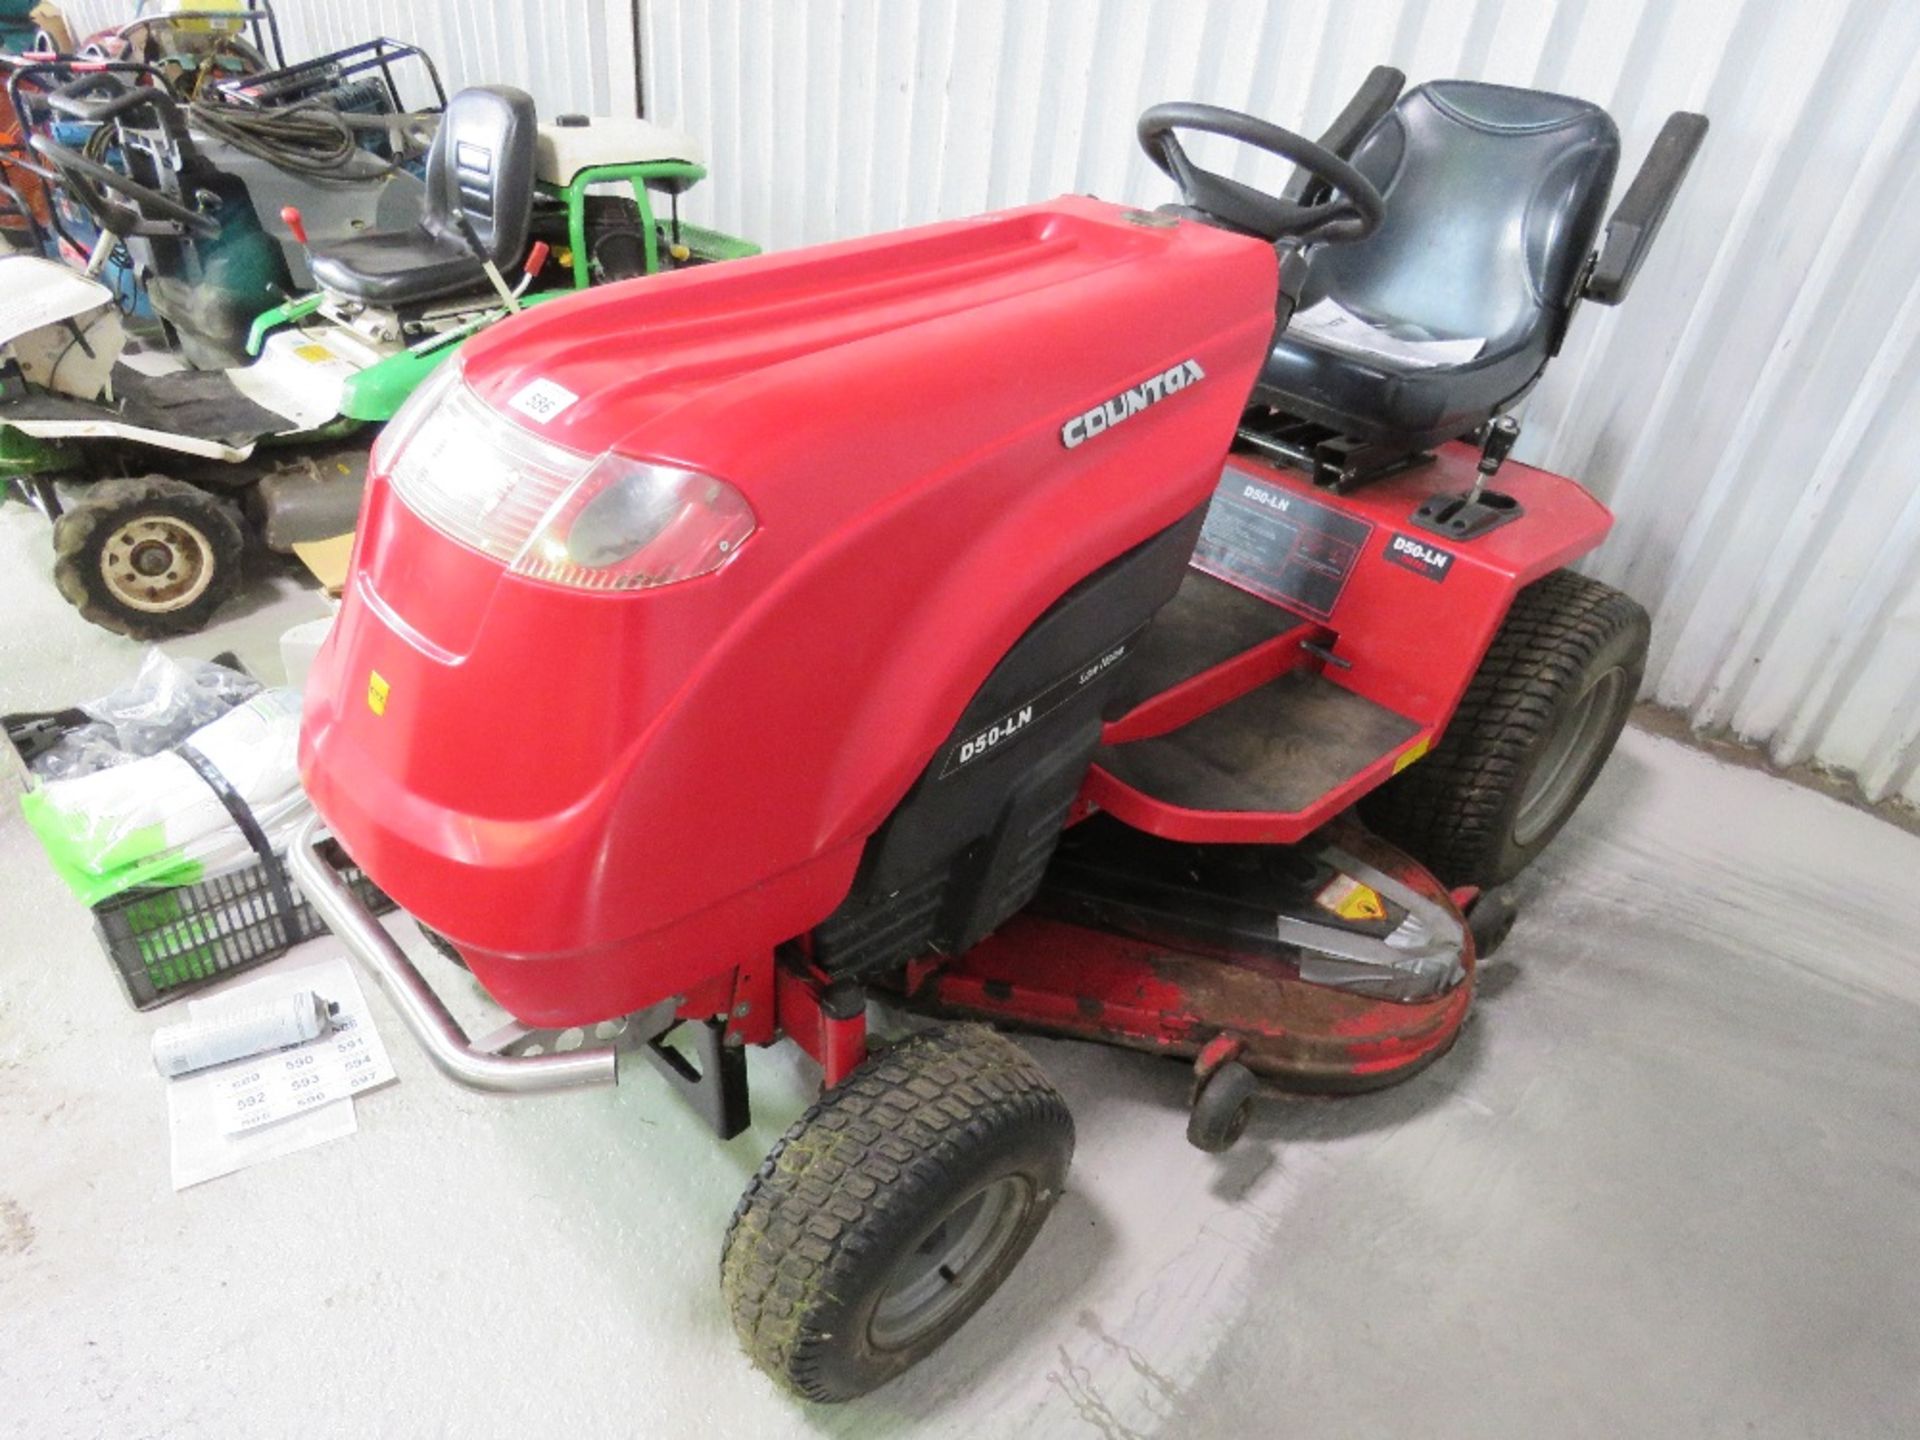 COUNTAX D50-LN DIESEL ENGINED PROFESSIONAL RIDE ON MOWER. 1.2M WIDE DECK. WHEN TESTED WAS SEEN TO RU